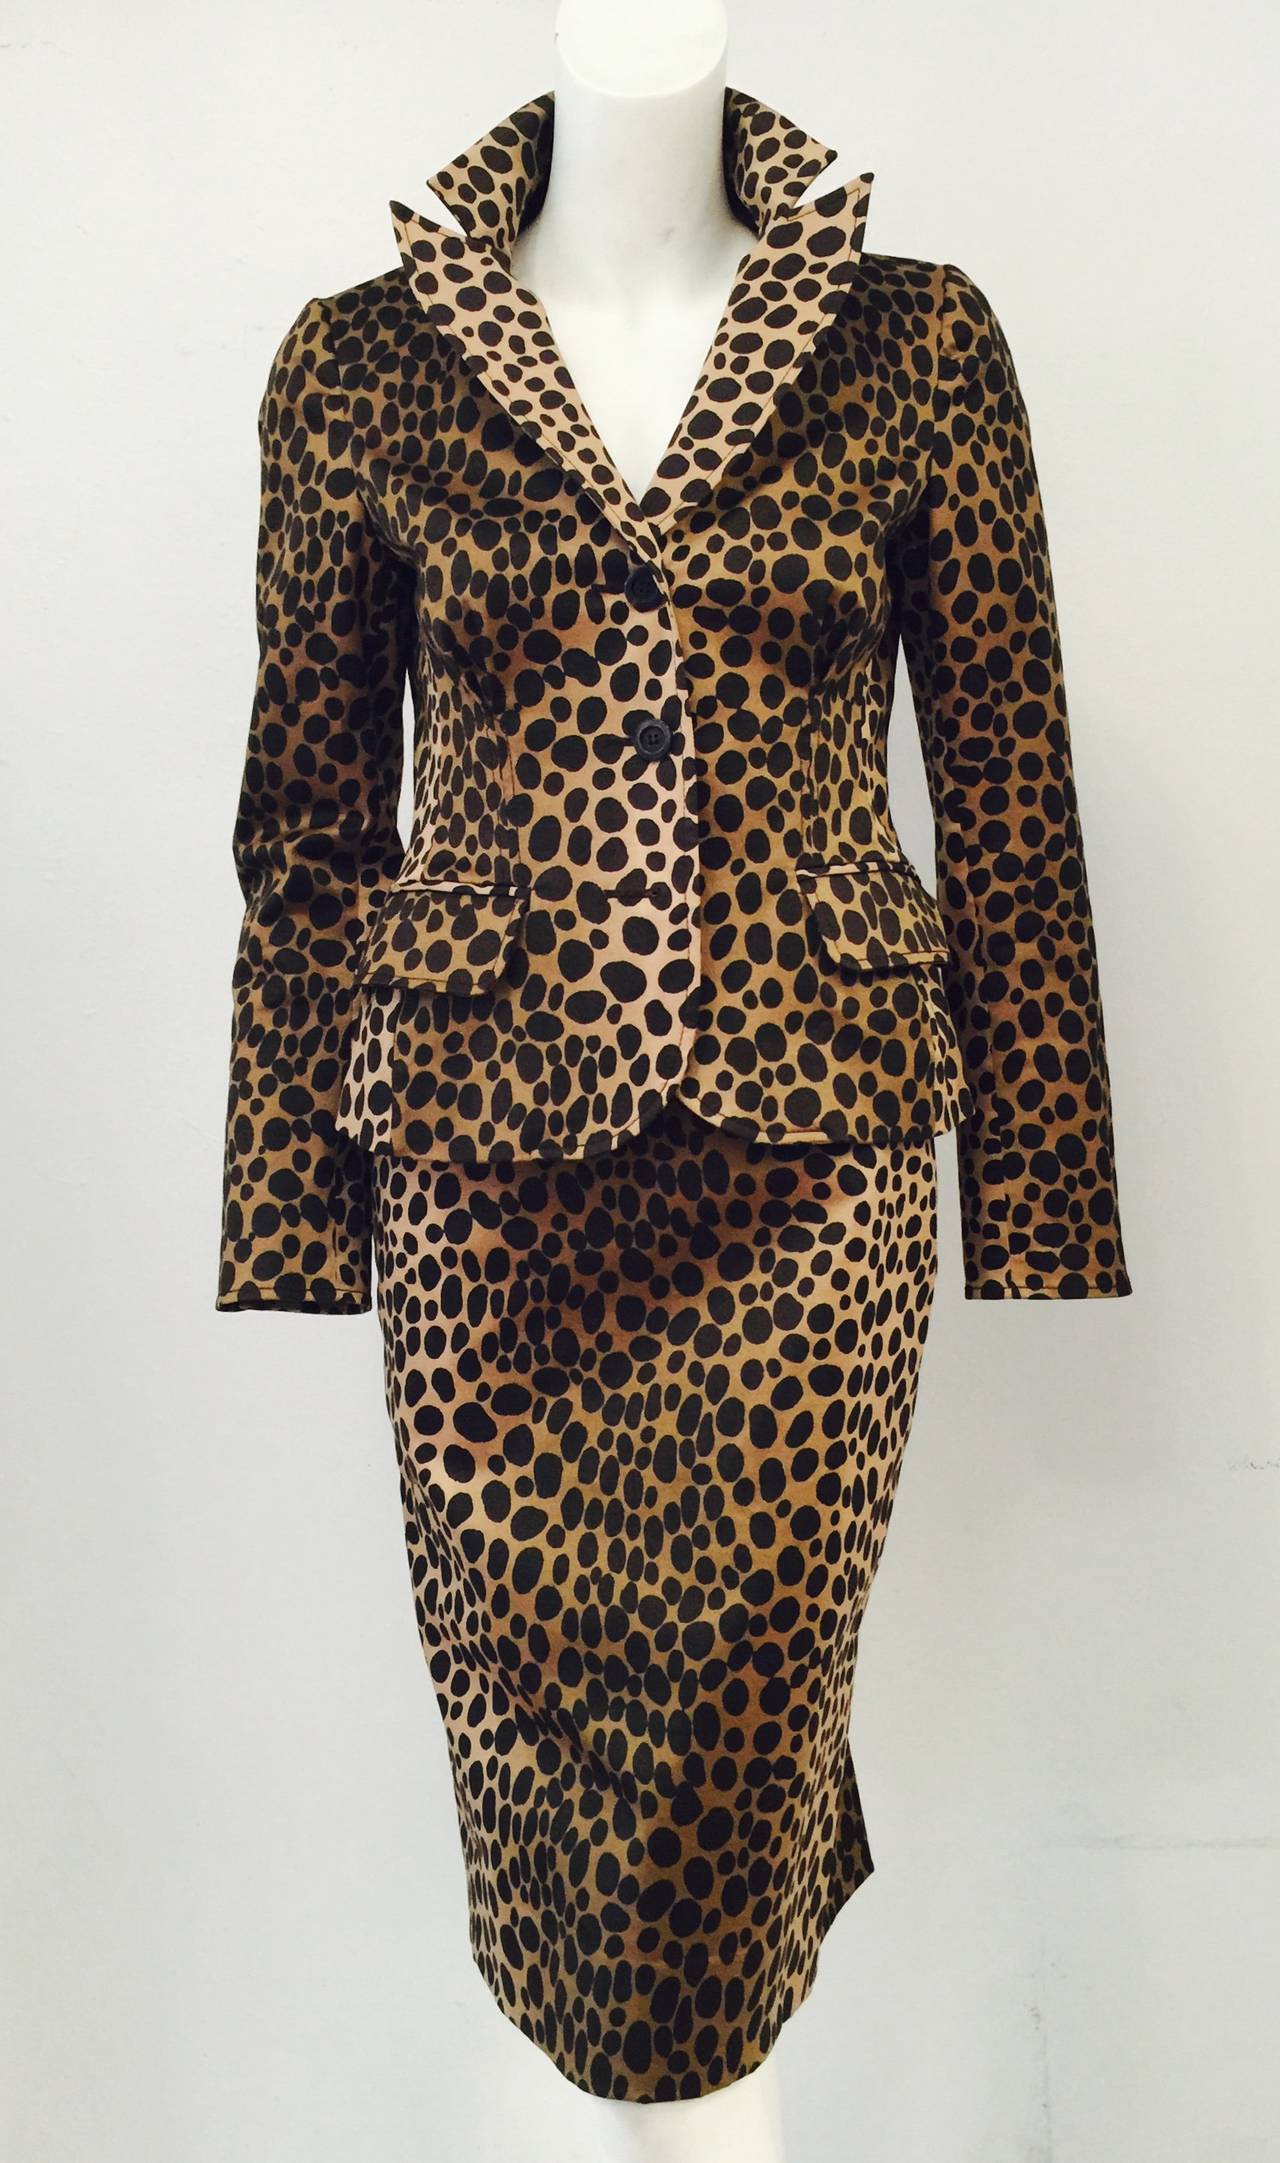 Magnificent Moschino Cheap and Chic Cotton Stretch Leopard Print Skirt Suit In Excellent Condition For Sale In Palm Beach, FL